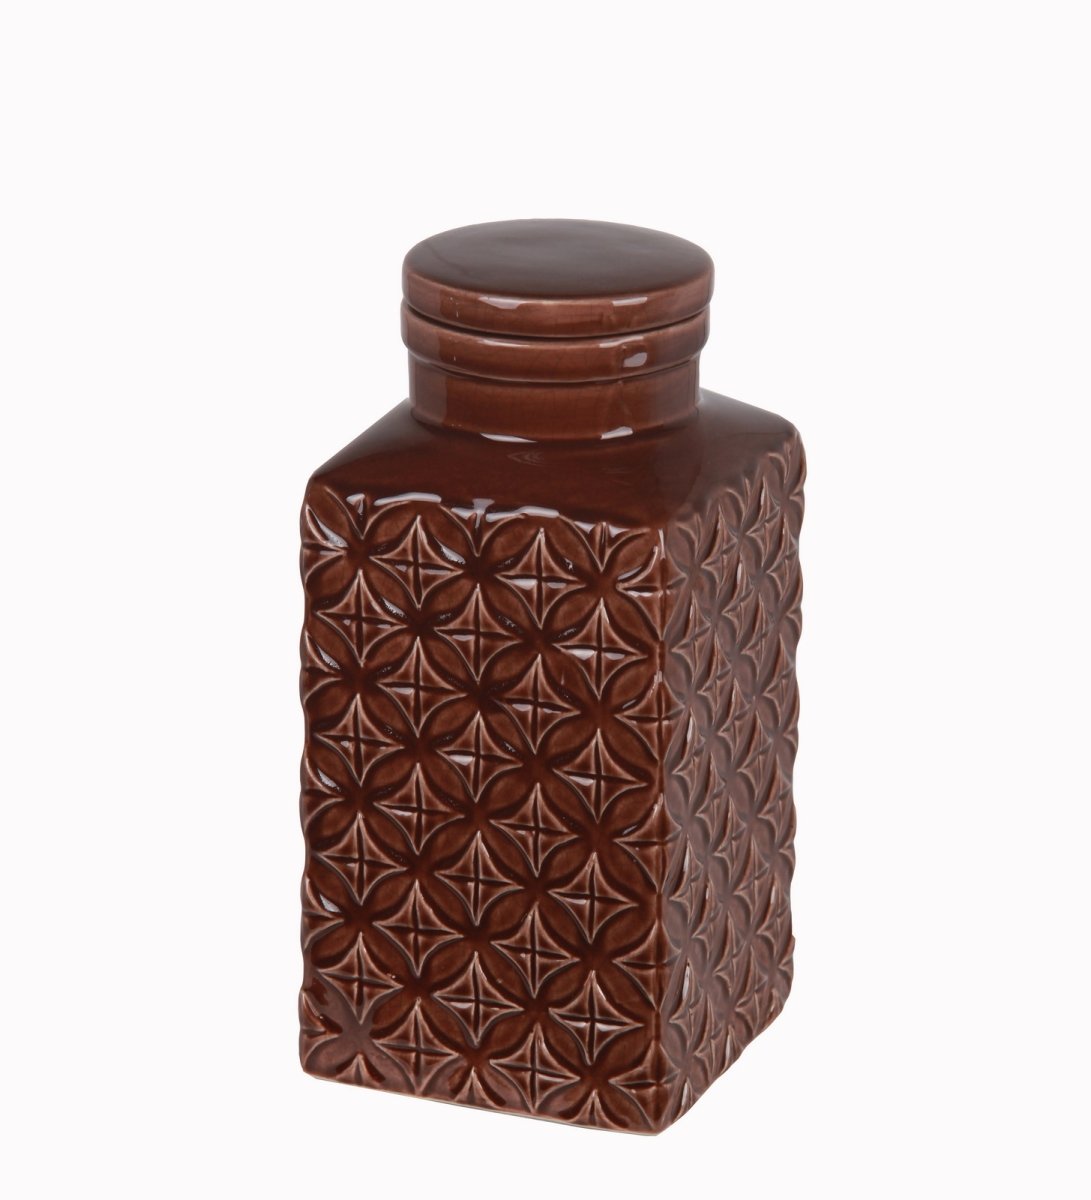 84110 6 X 6 X 12 In. Ceramic Jar With Lid, Small